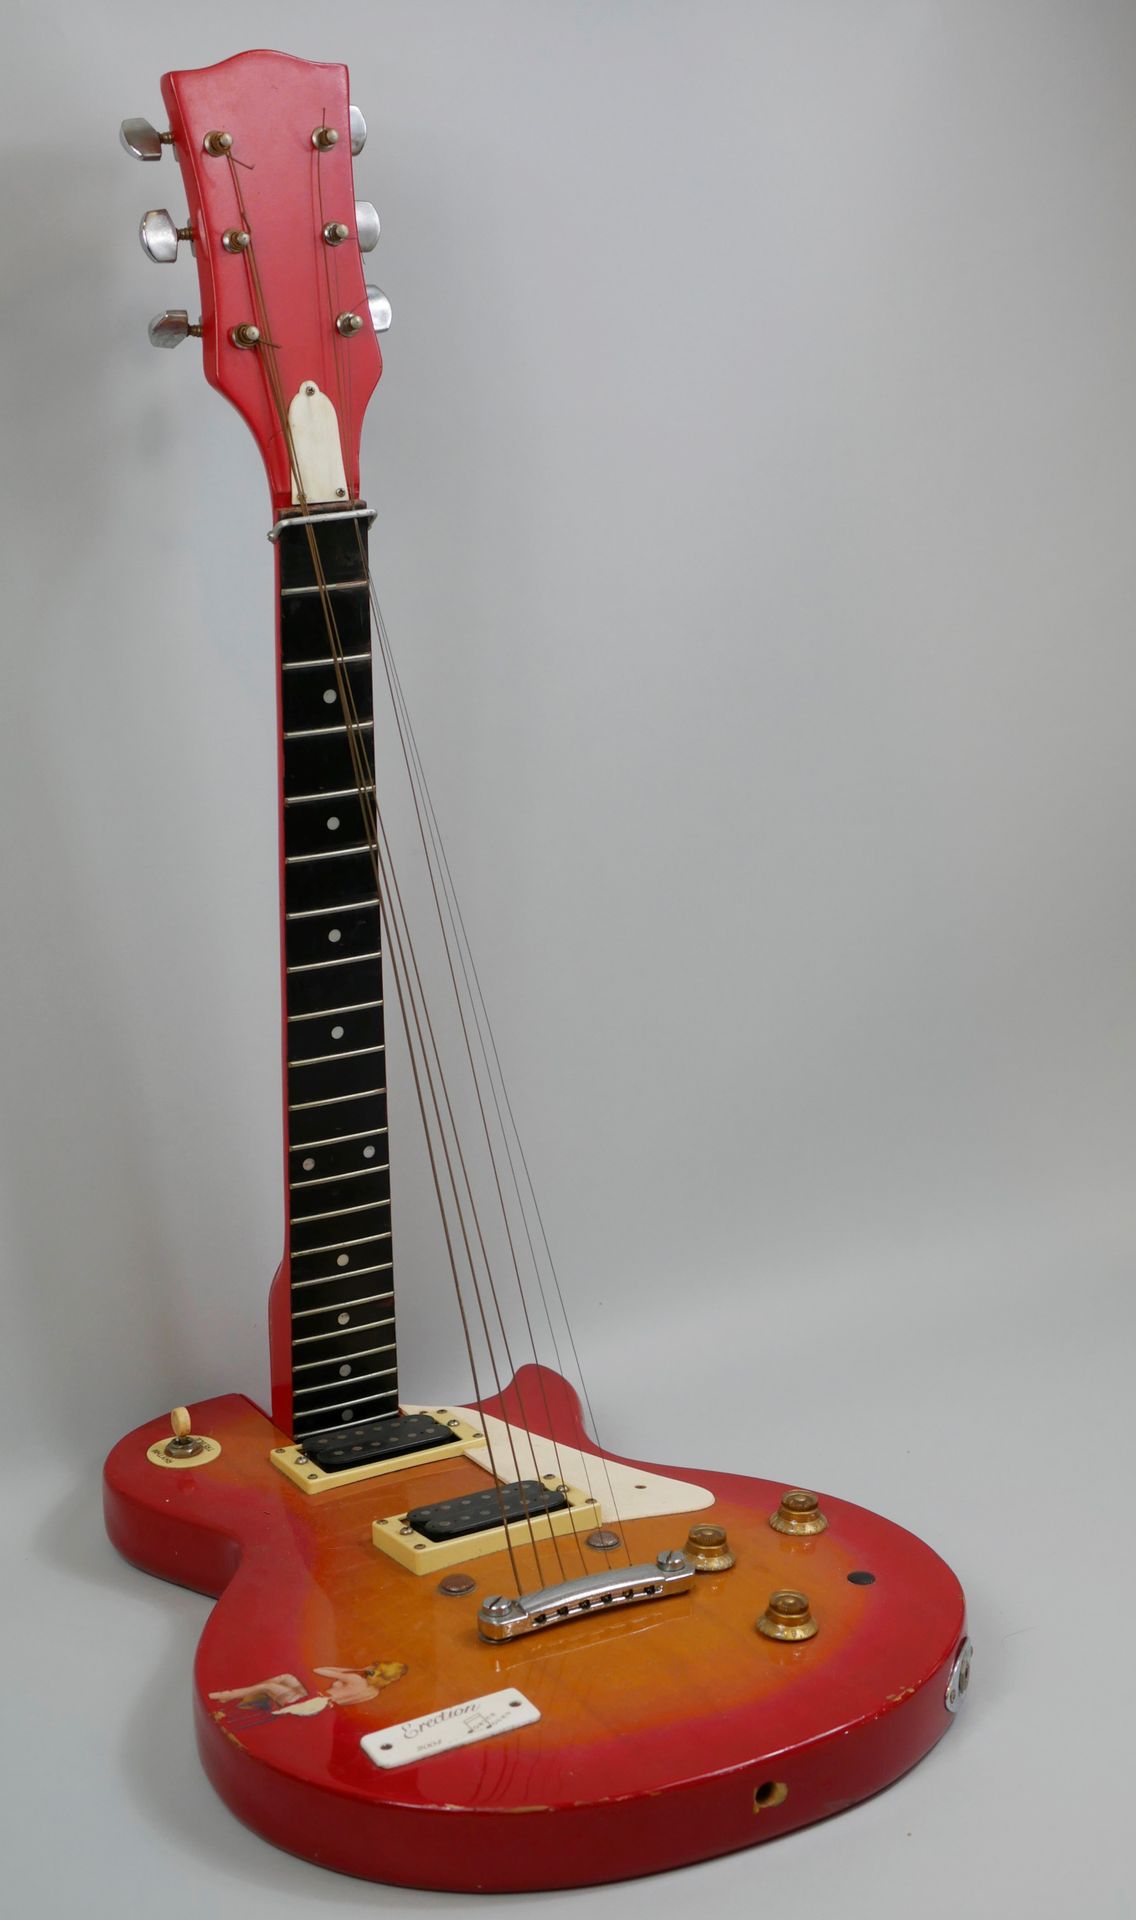 Null Guitar Erection, Sculpture made from an electric guitar, titled and dated 2&hellip;